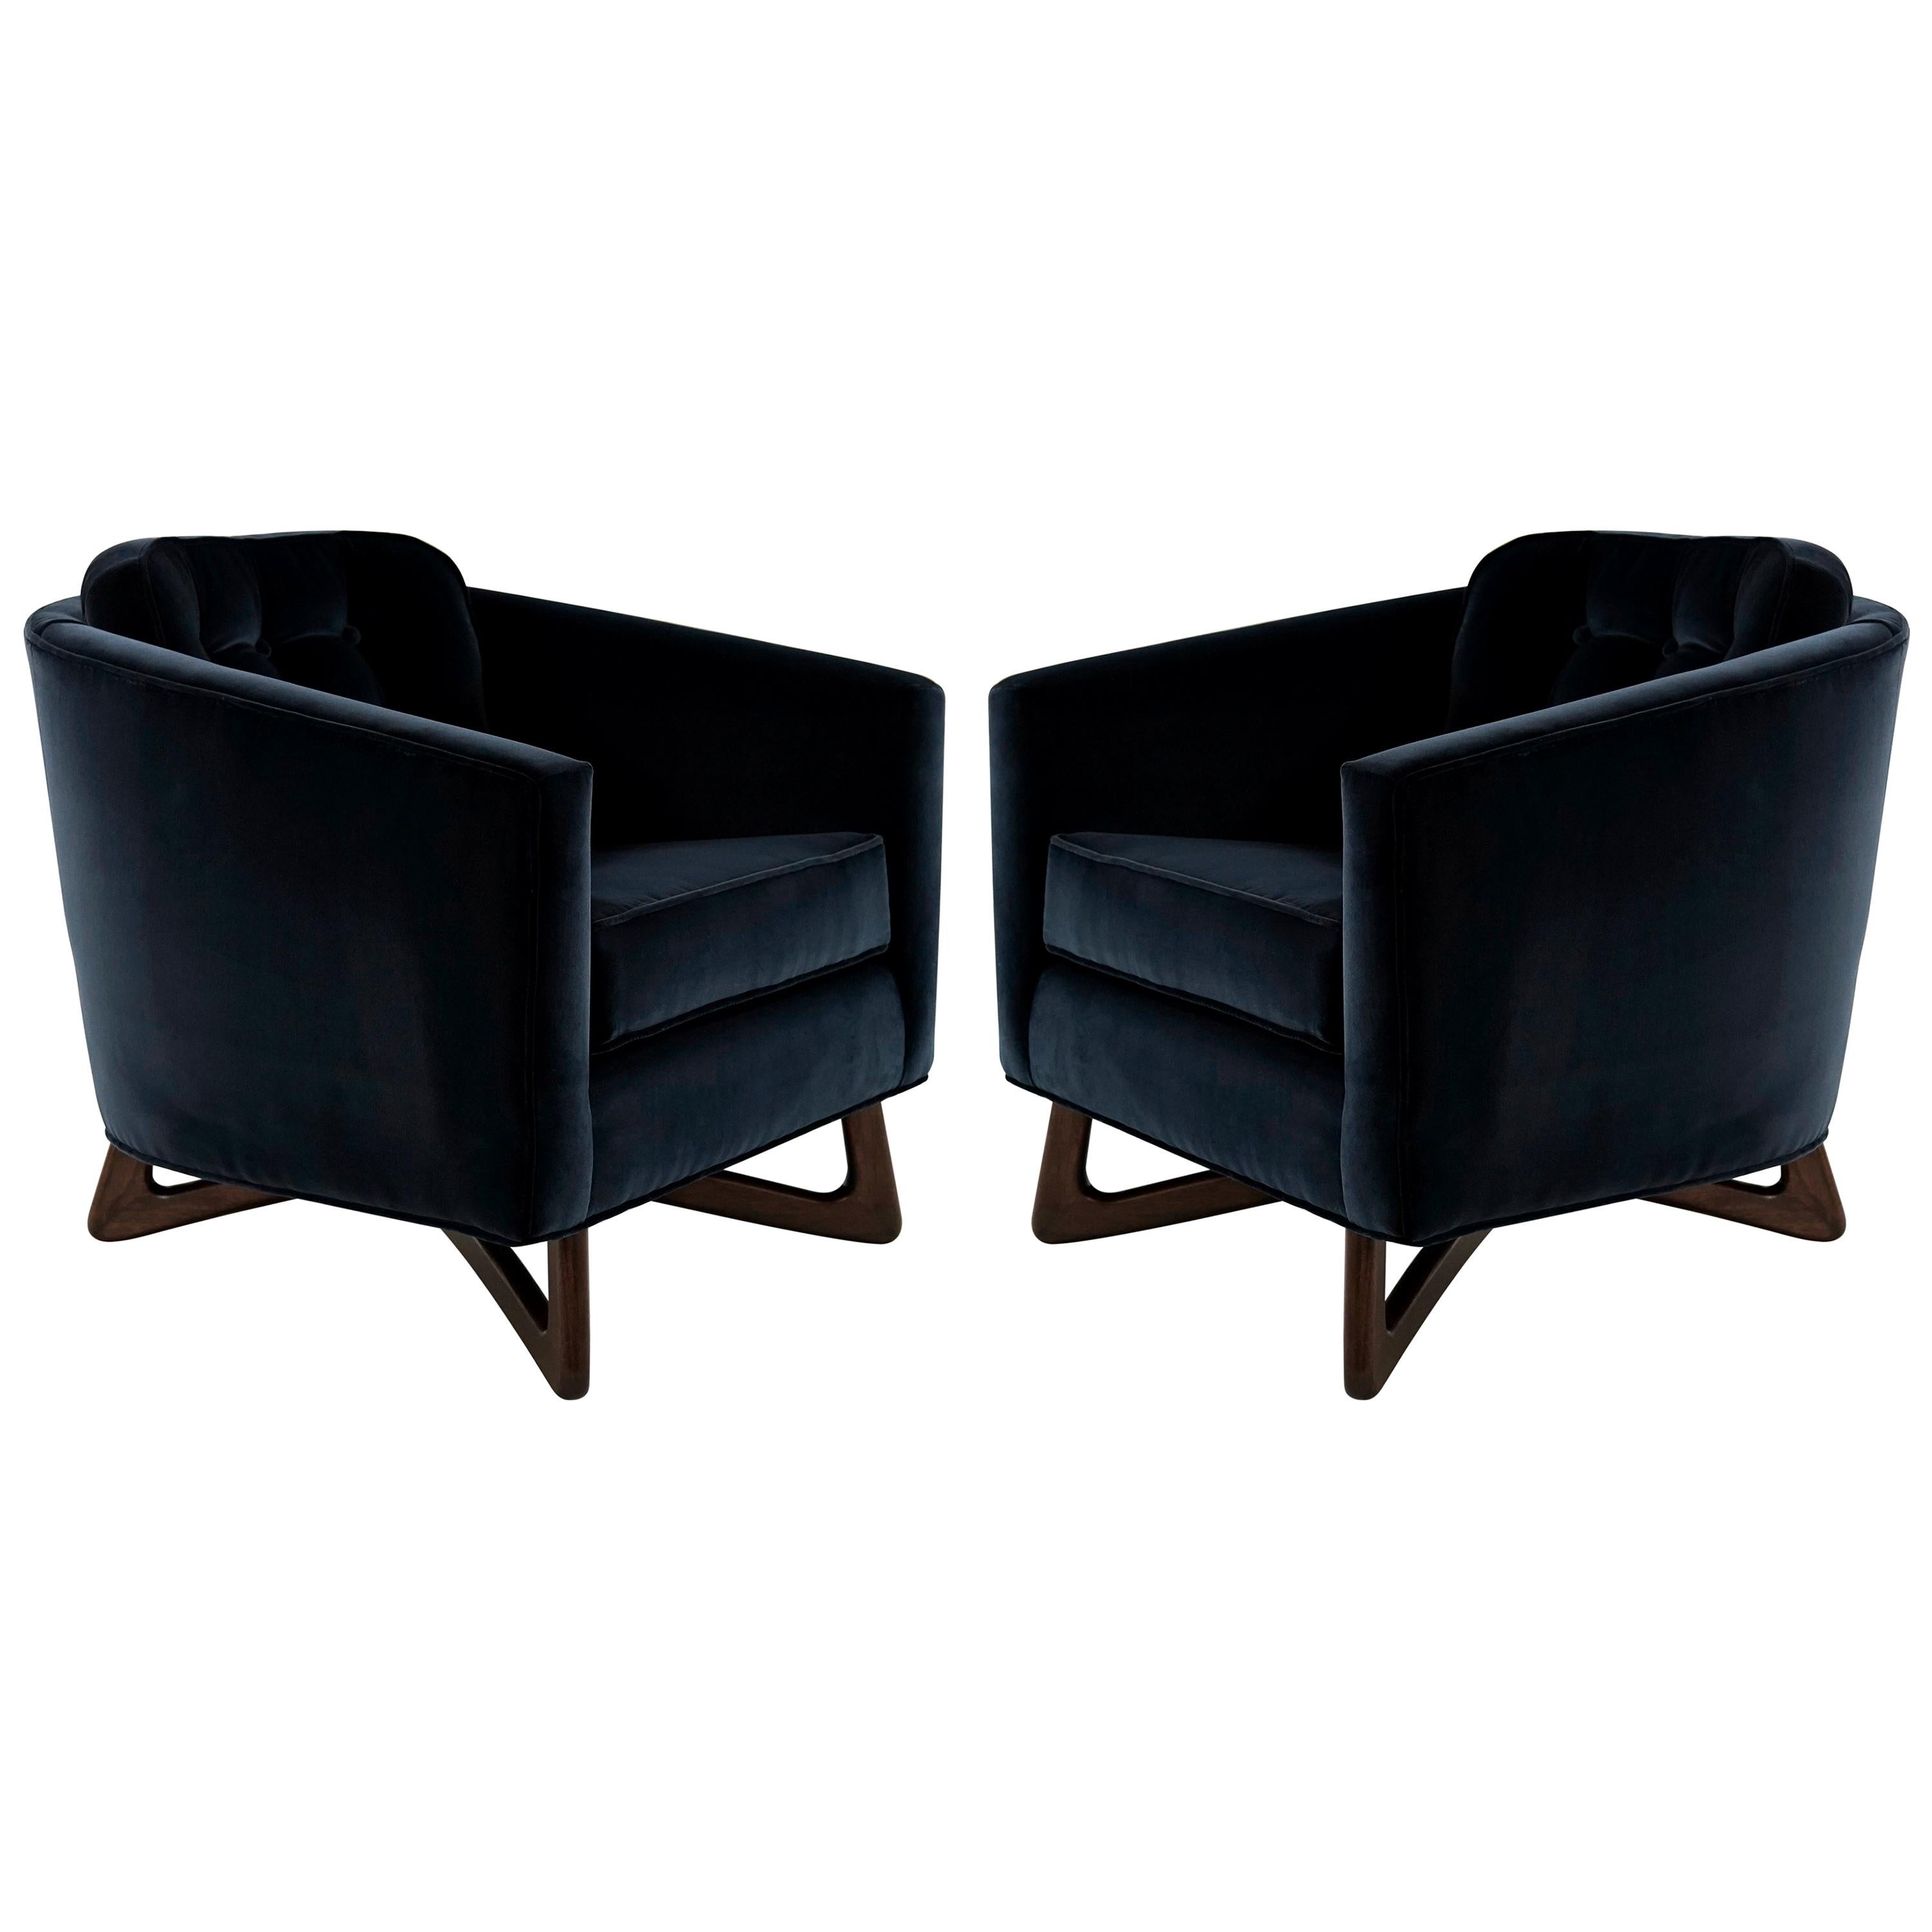 Adrian Pearsall Lounge Chairs in Navy Blue Velvet, circa 1950s